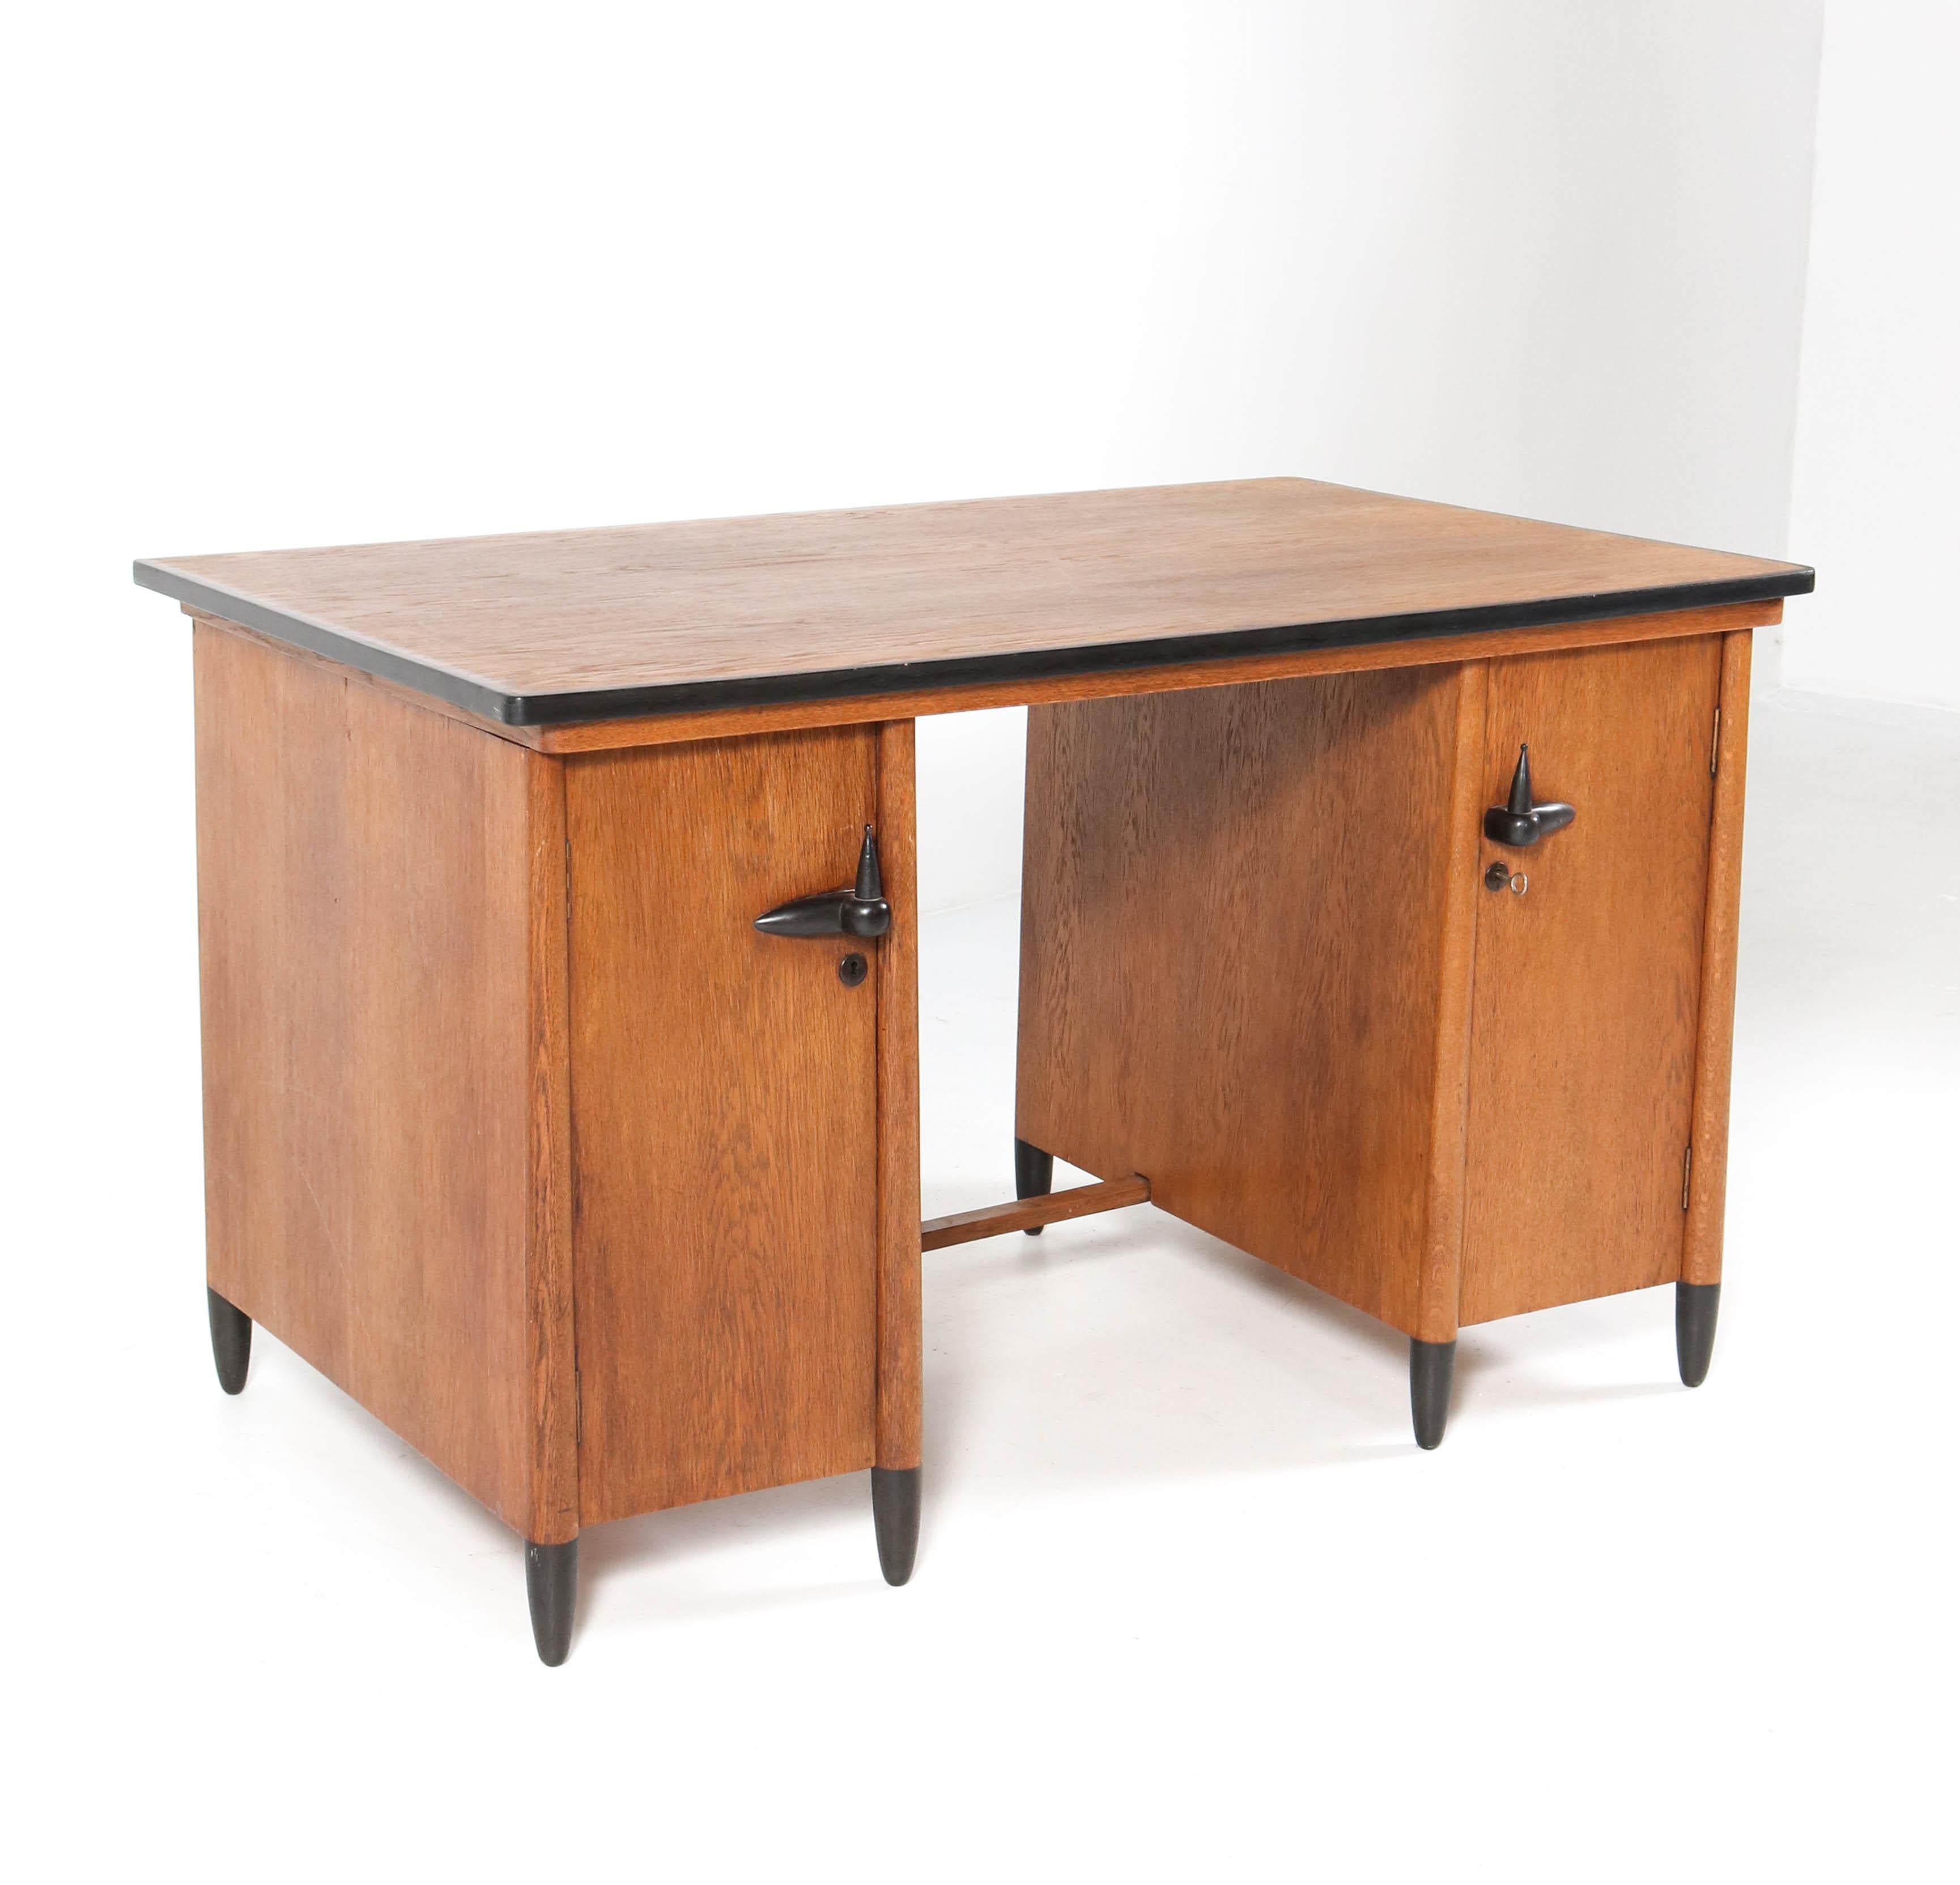 Elegant and rare Art Deco Amsterdam School ladies desk by Willem Penaat for
Metz & Co. Amsterdam.
Oak with original black lacquered wooden handles and legs.
This wonderful desk can be dismantled for safe transport.
In good original condition